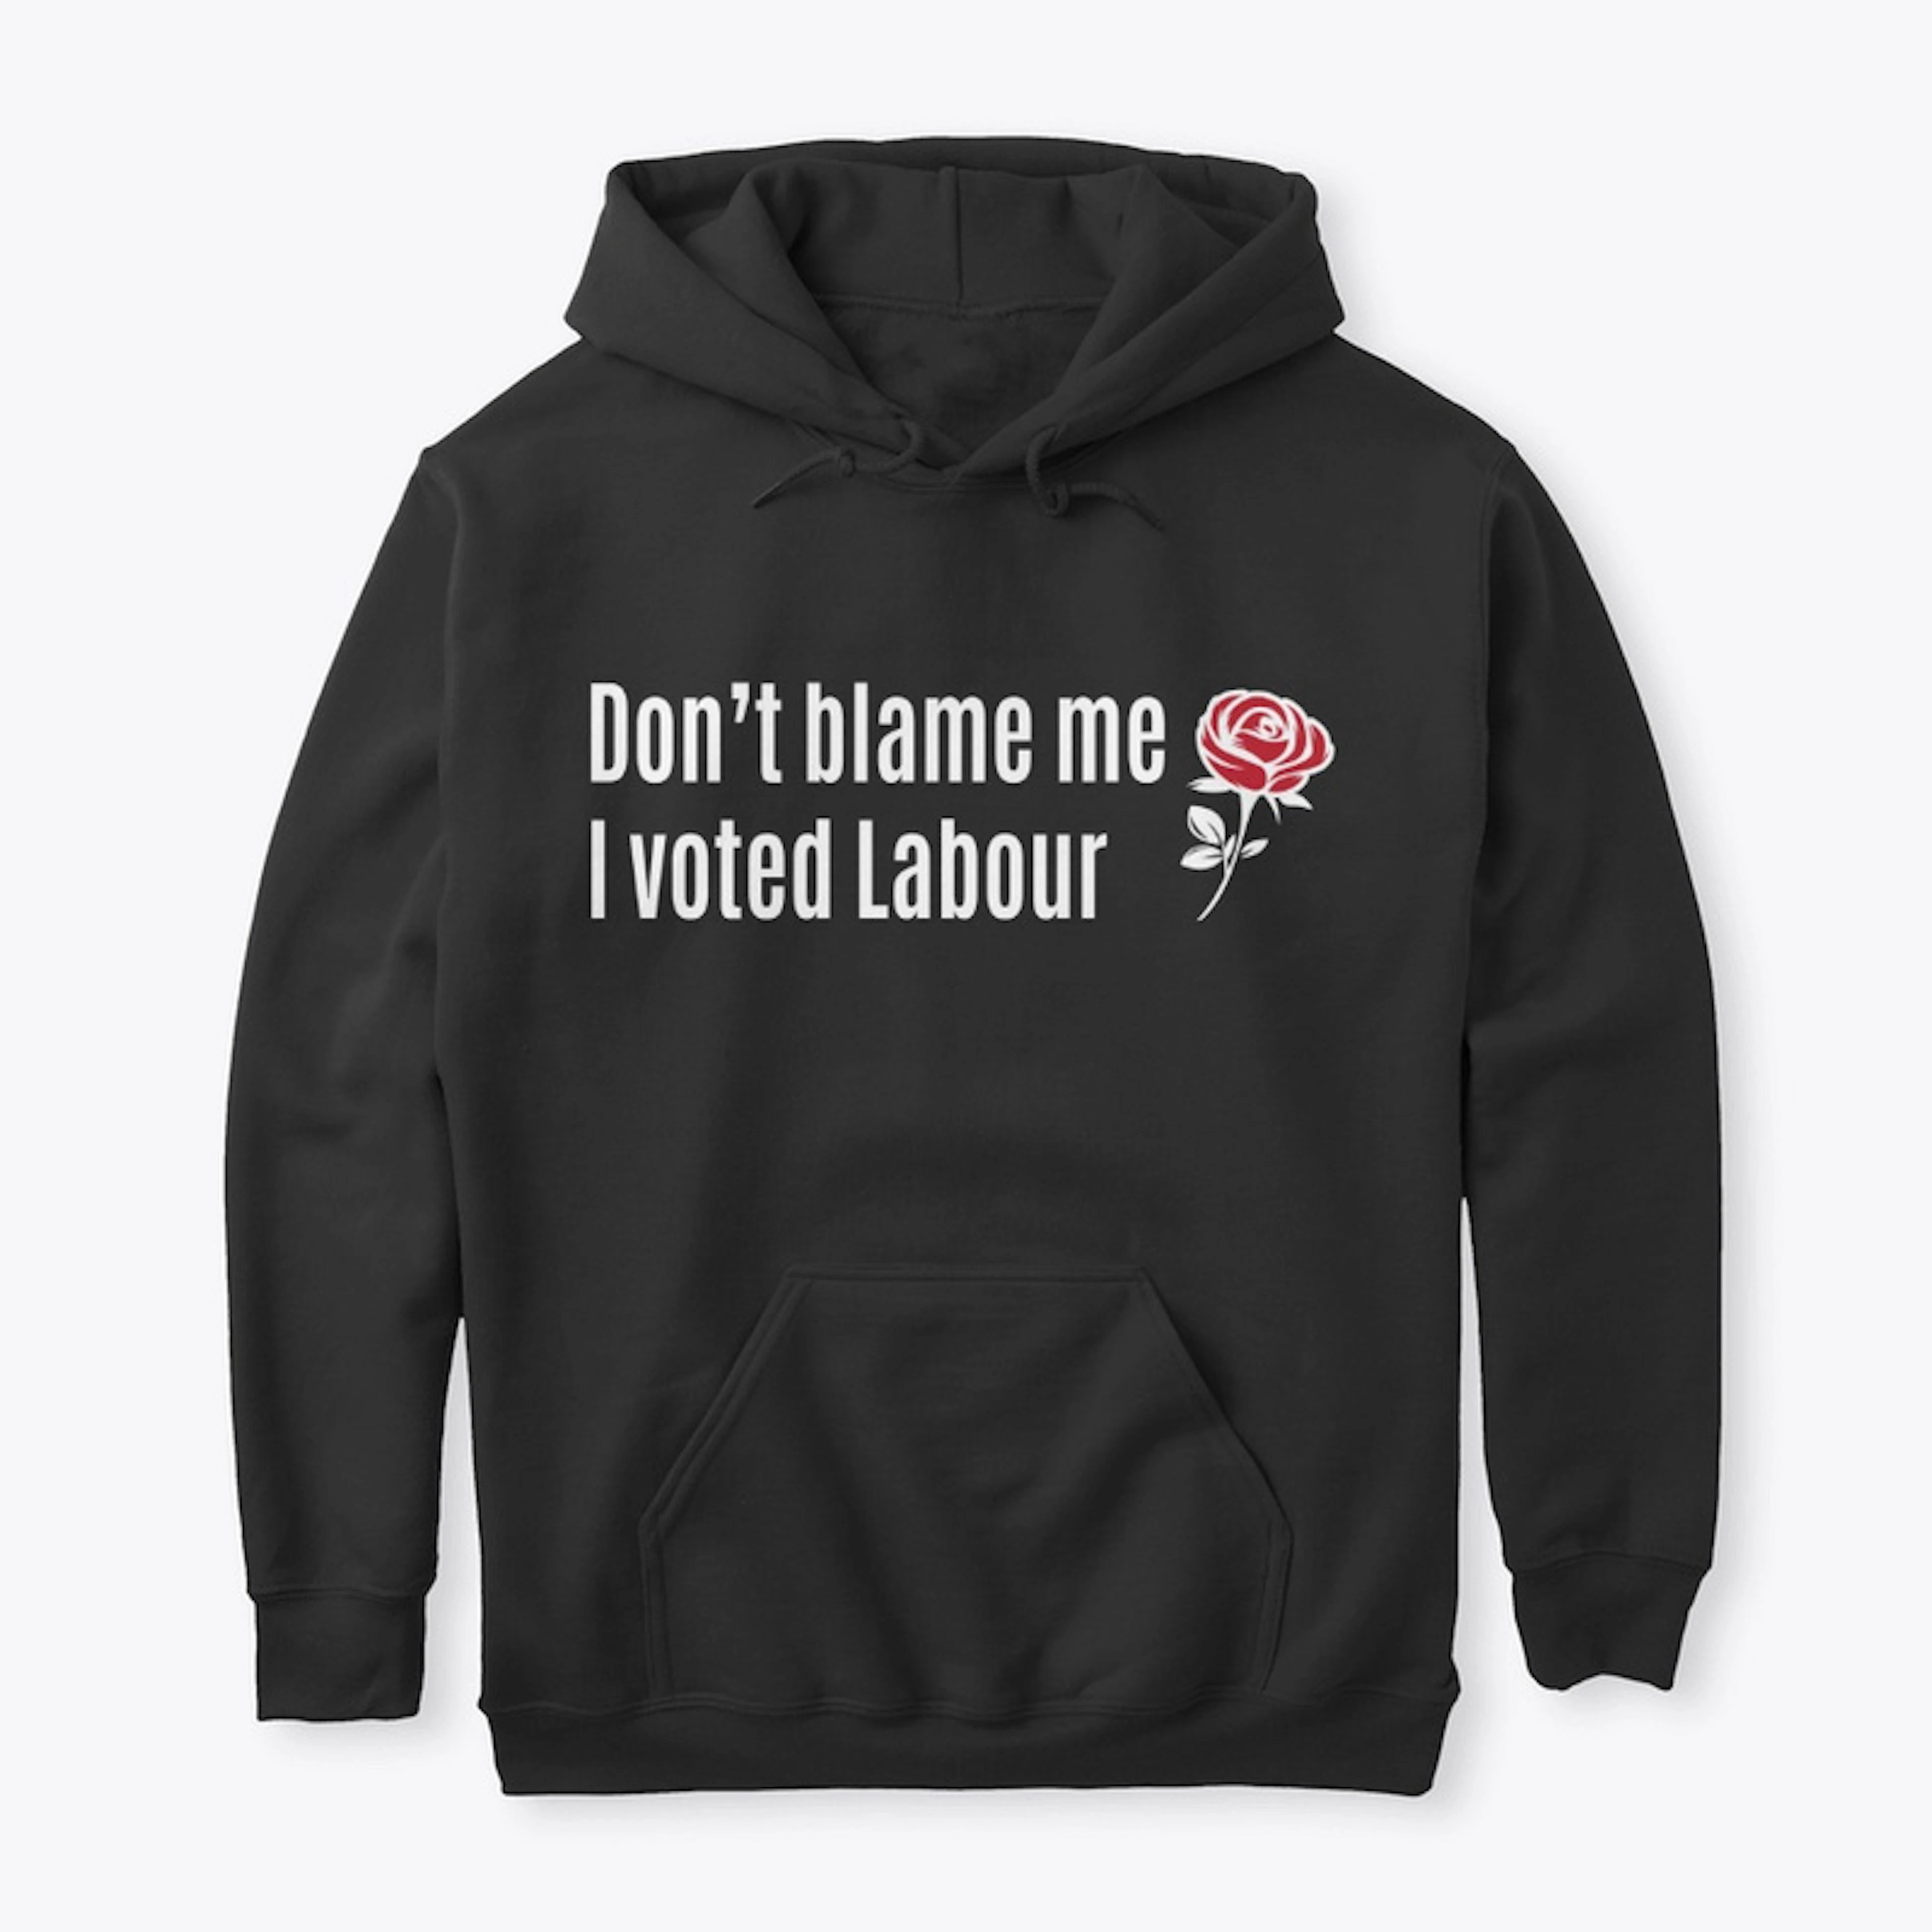 Don't blame me, I voted Labour